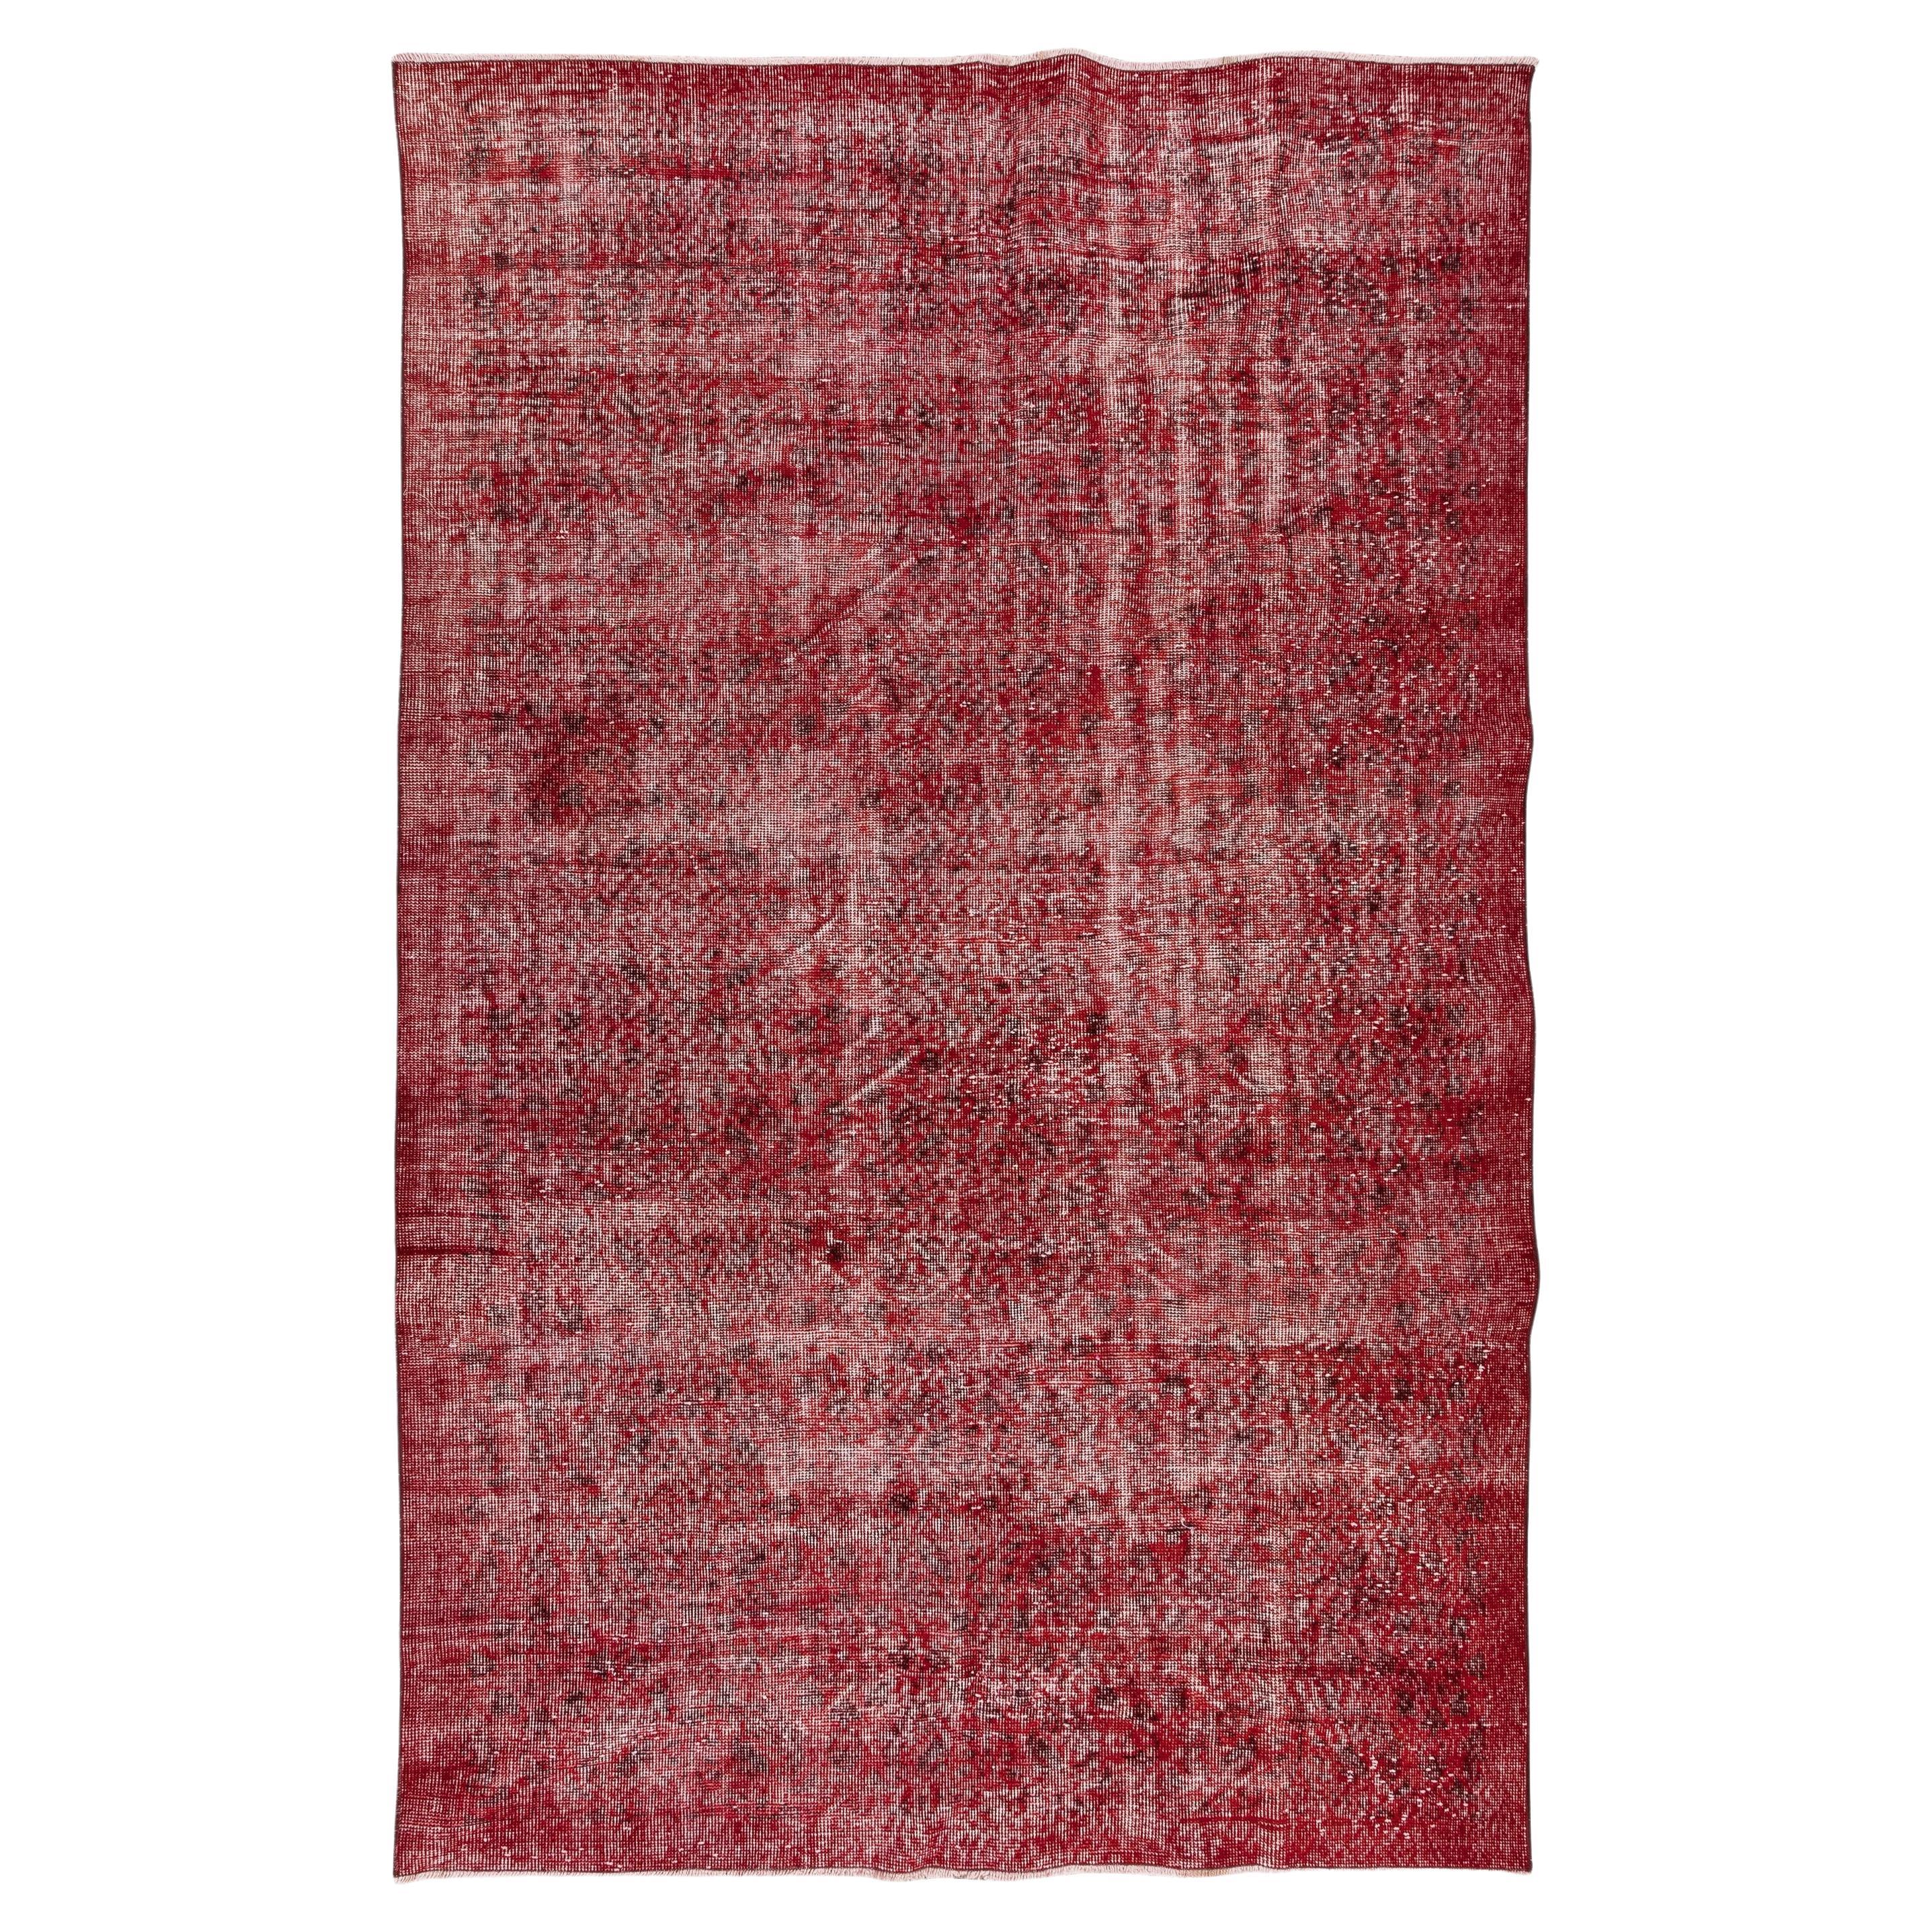 5.3x8.5 Ft Modern Handmade Turkish Rug in Red, Vintage Wool and Cotton Carpet